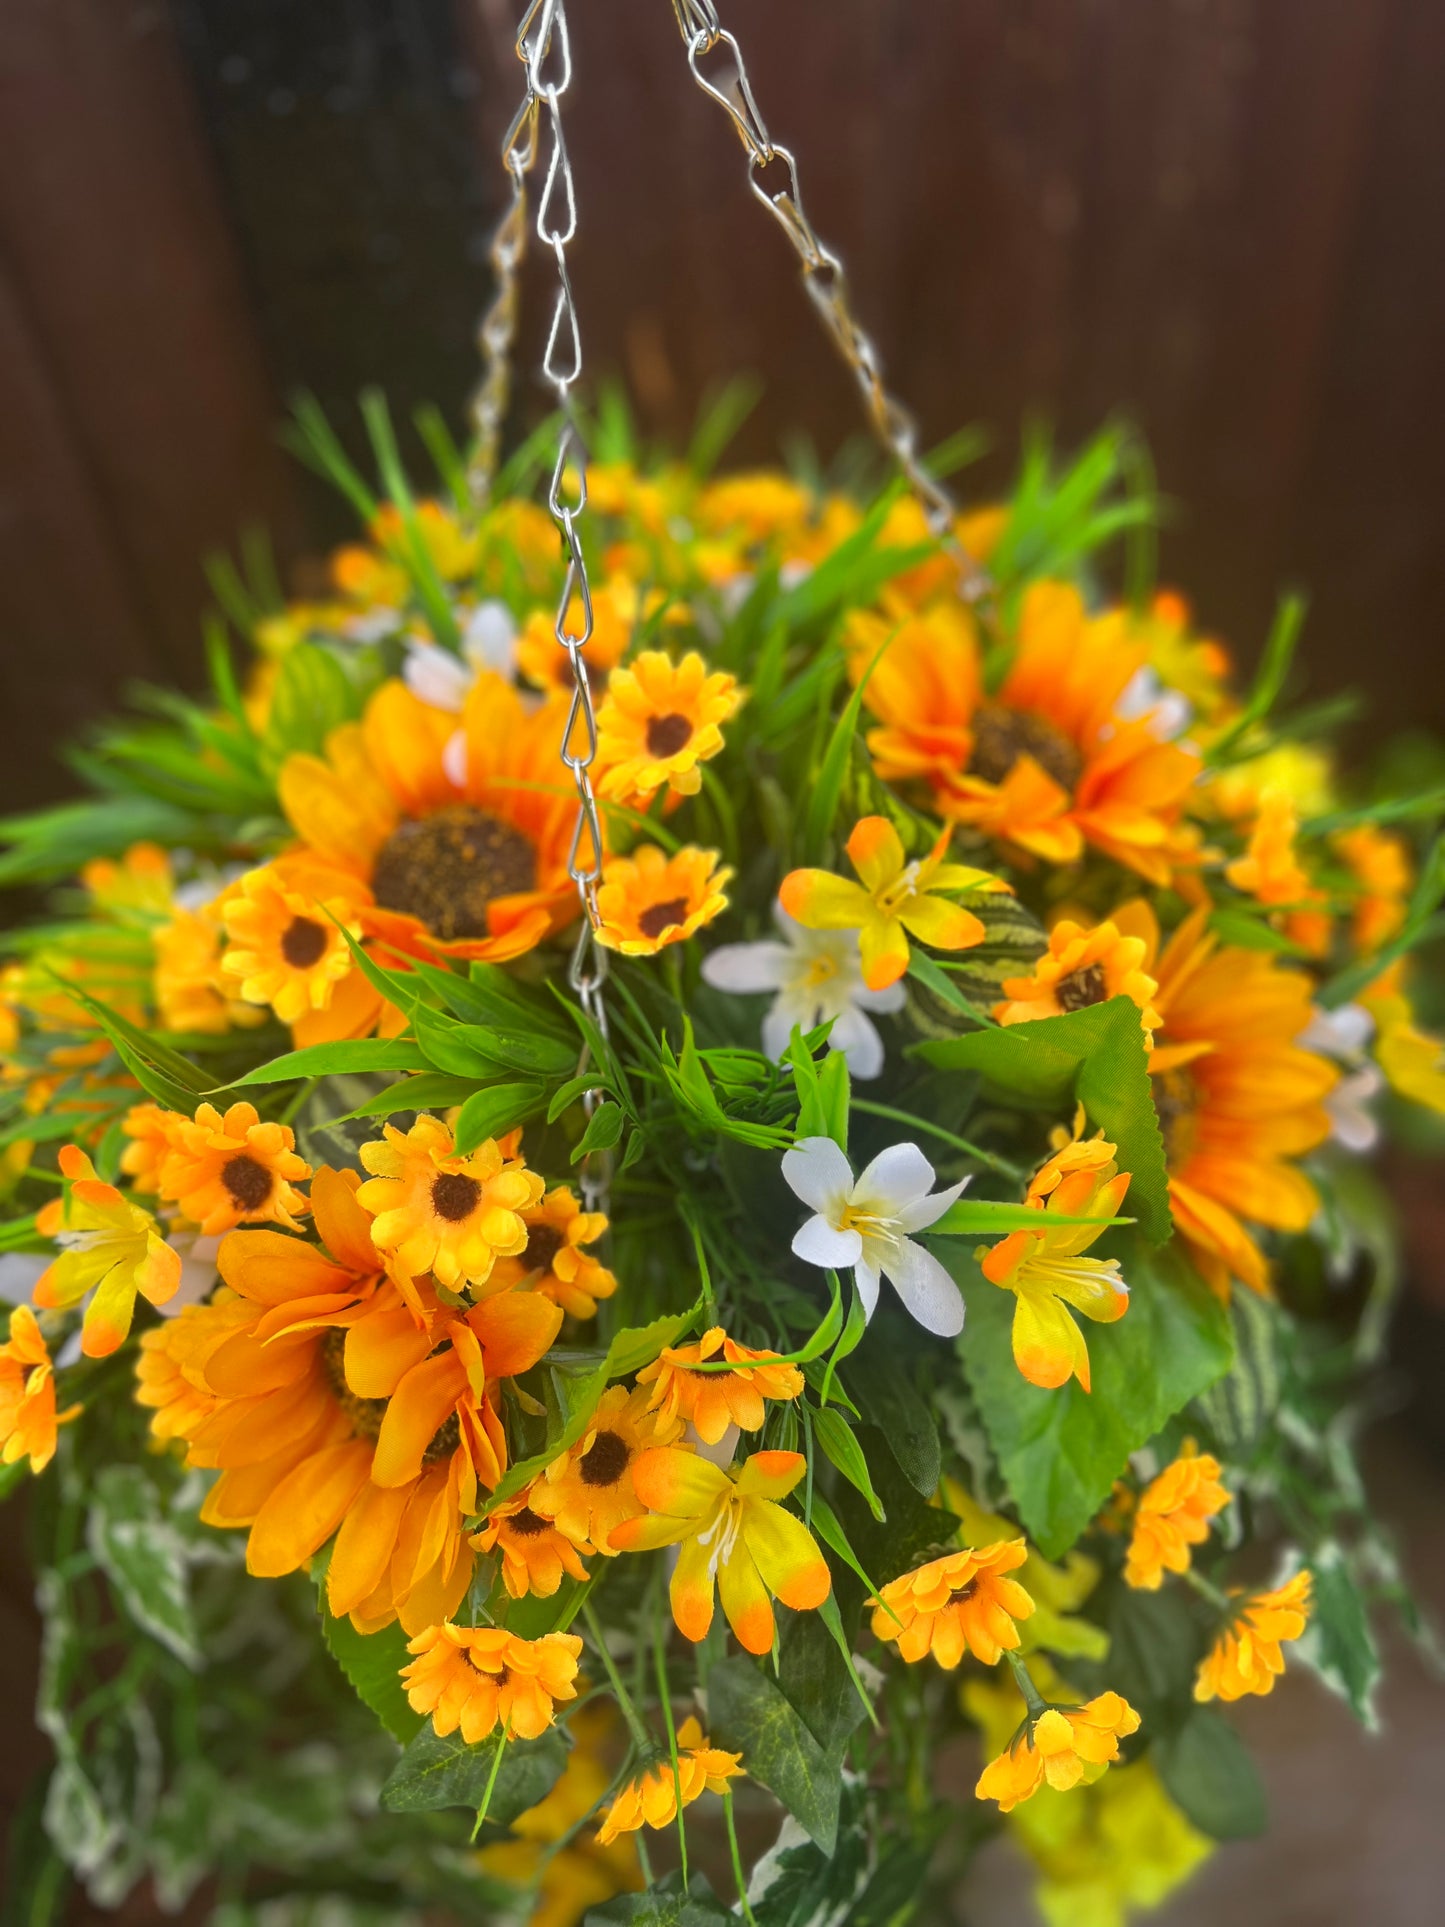 DELUXE XL HANGING BASKET SUNFLOWER MIX 12 INCH CONE